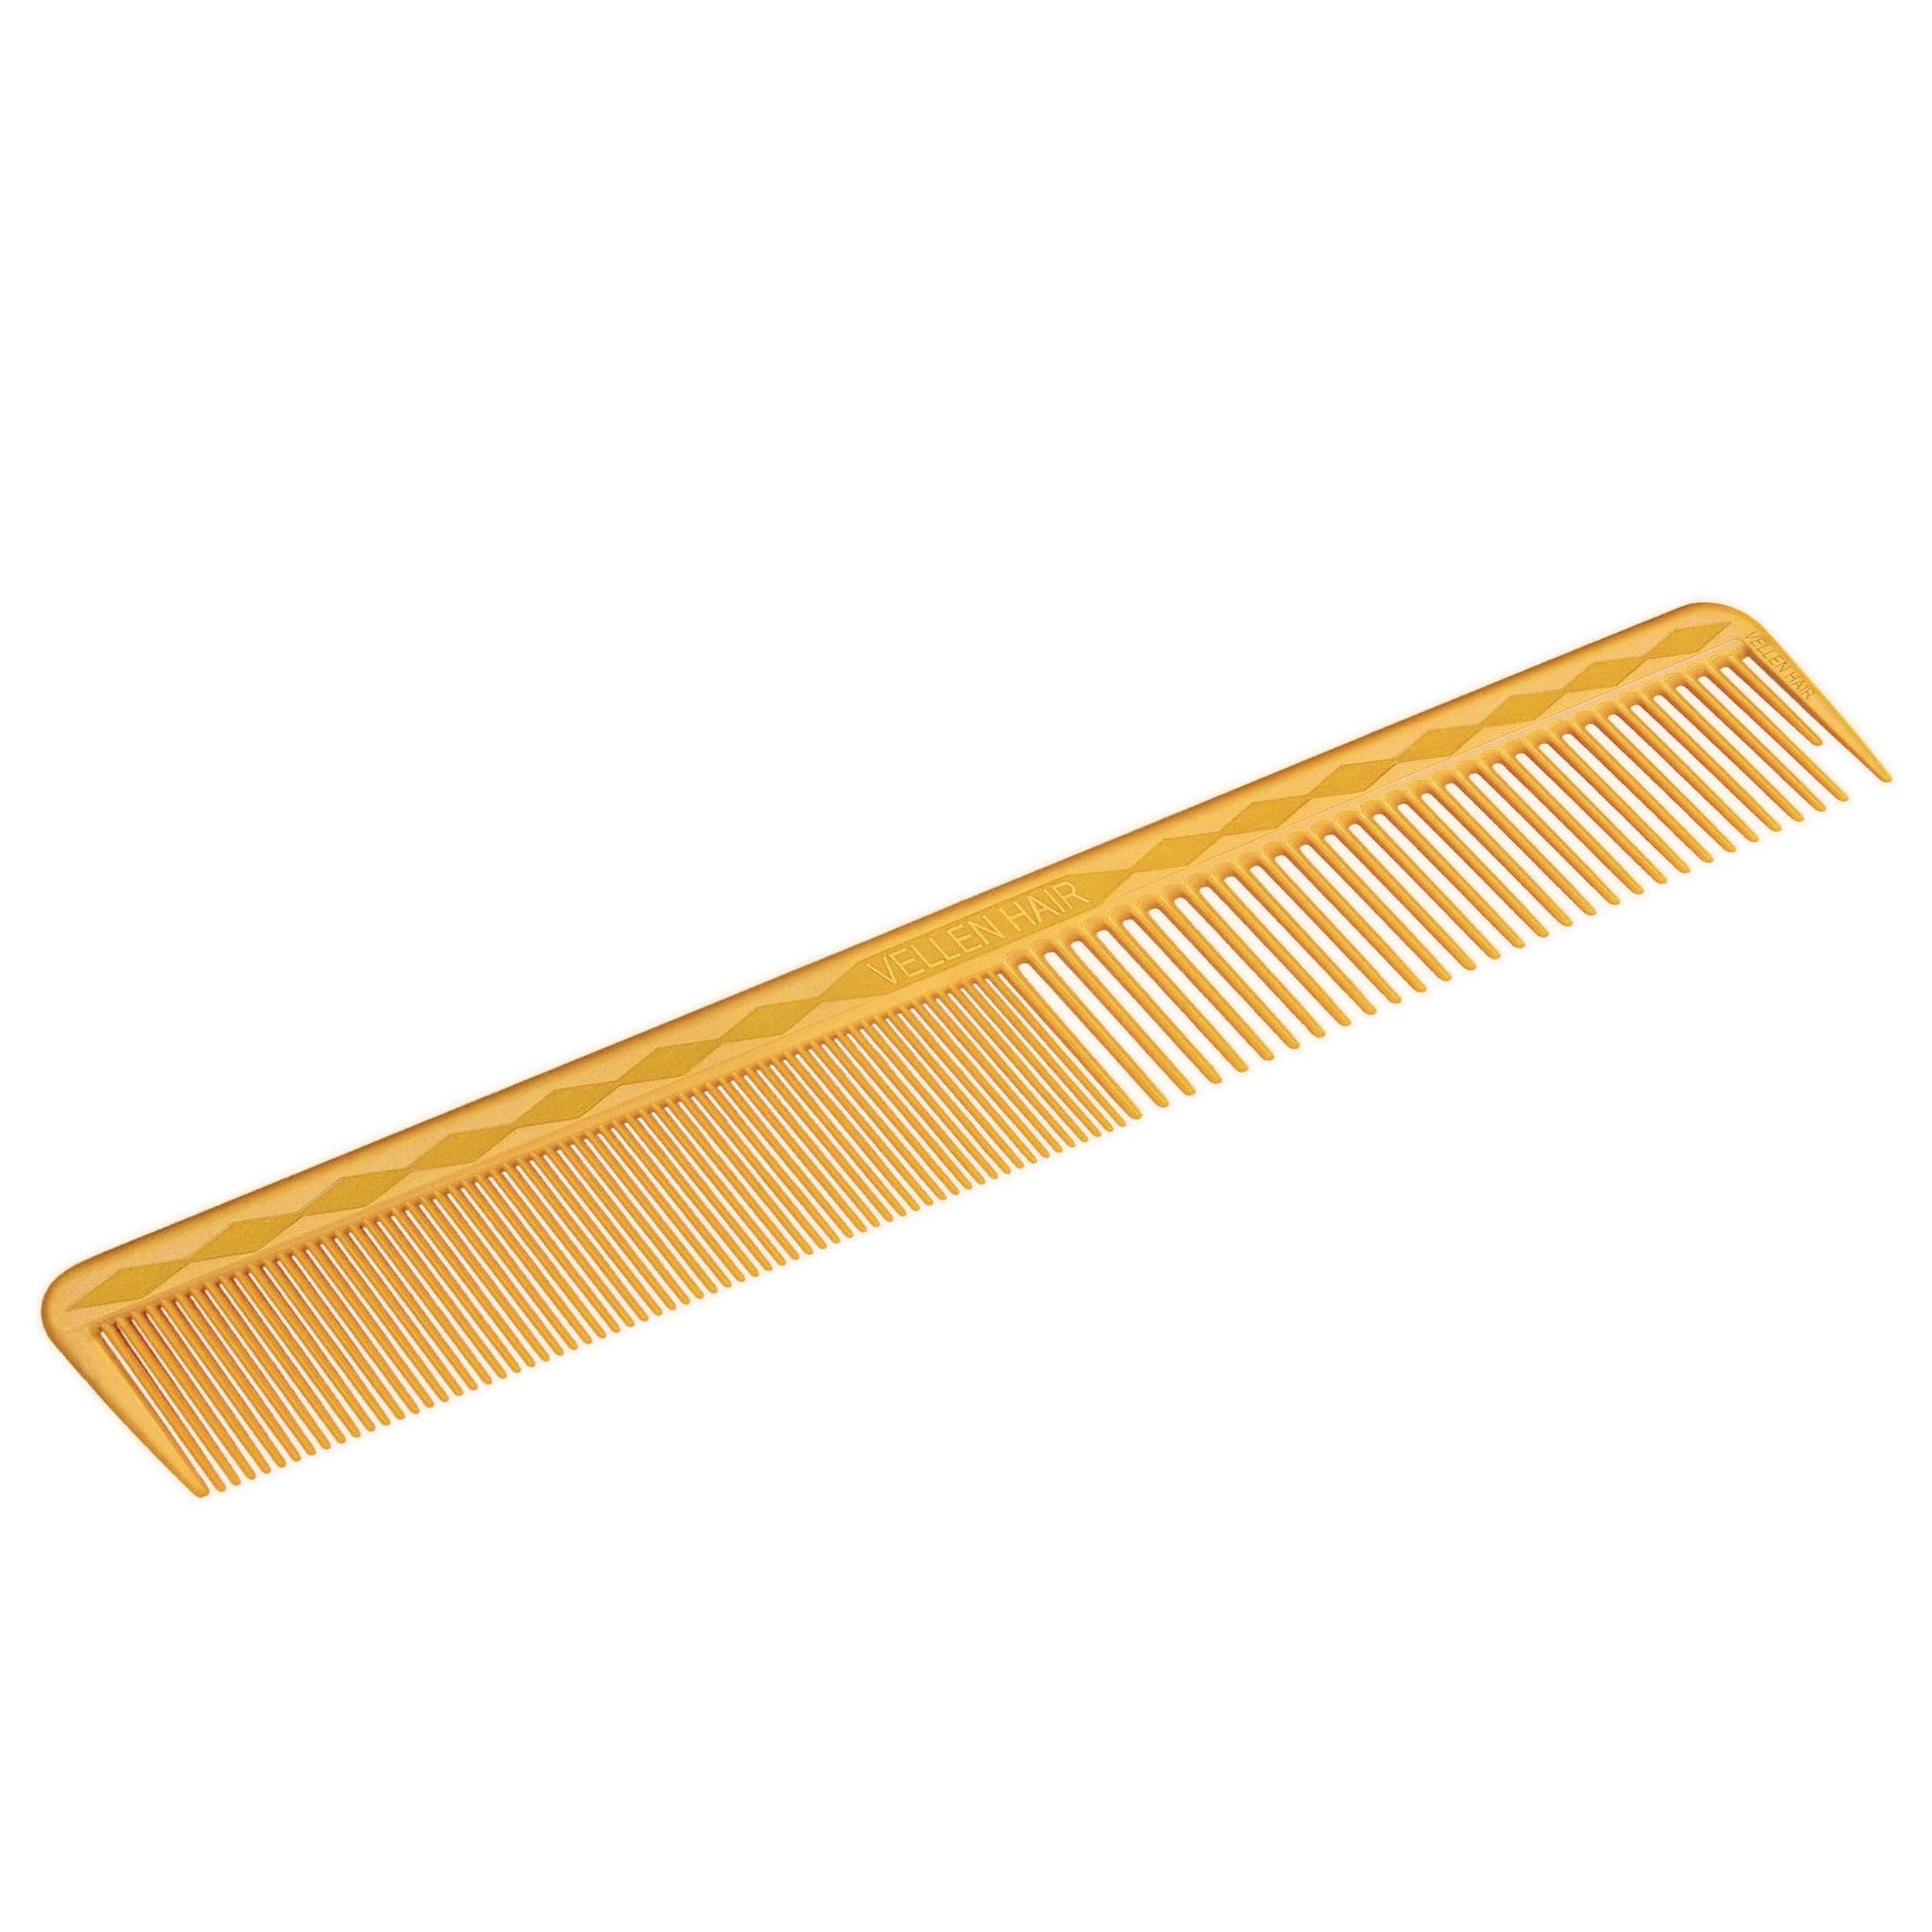 Vellen Hair® Ultimate Cutting Comb - VH202 - 17.8 cm / 7 inch - Yellow